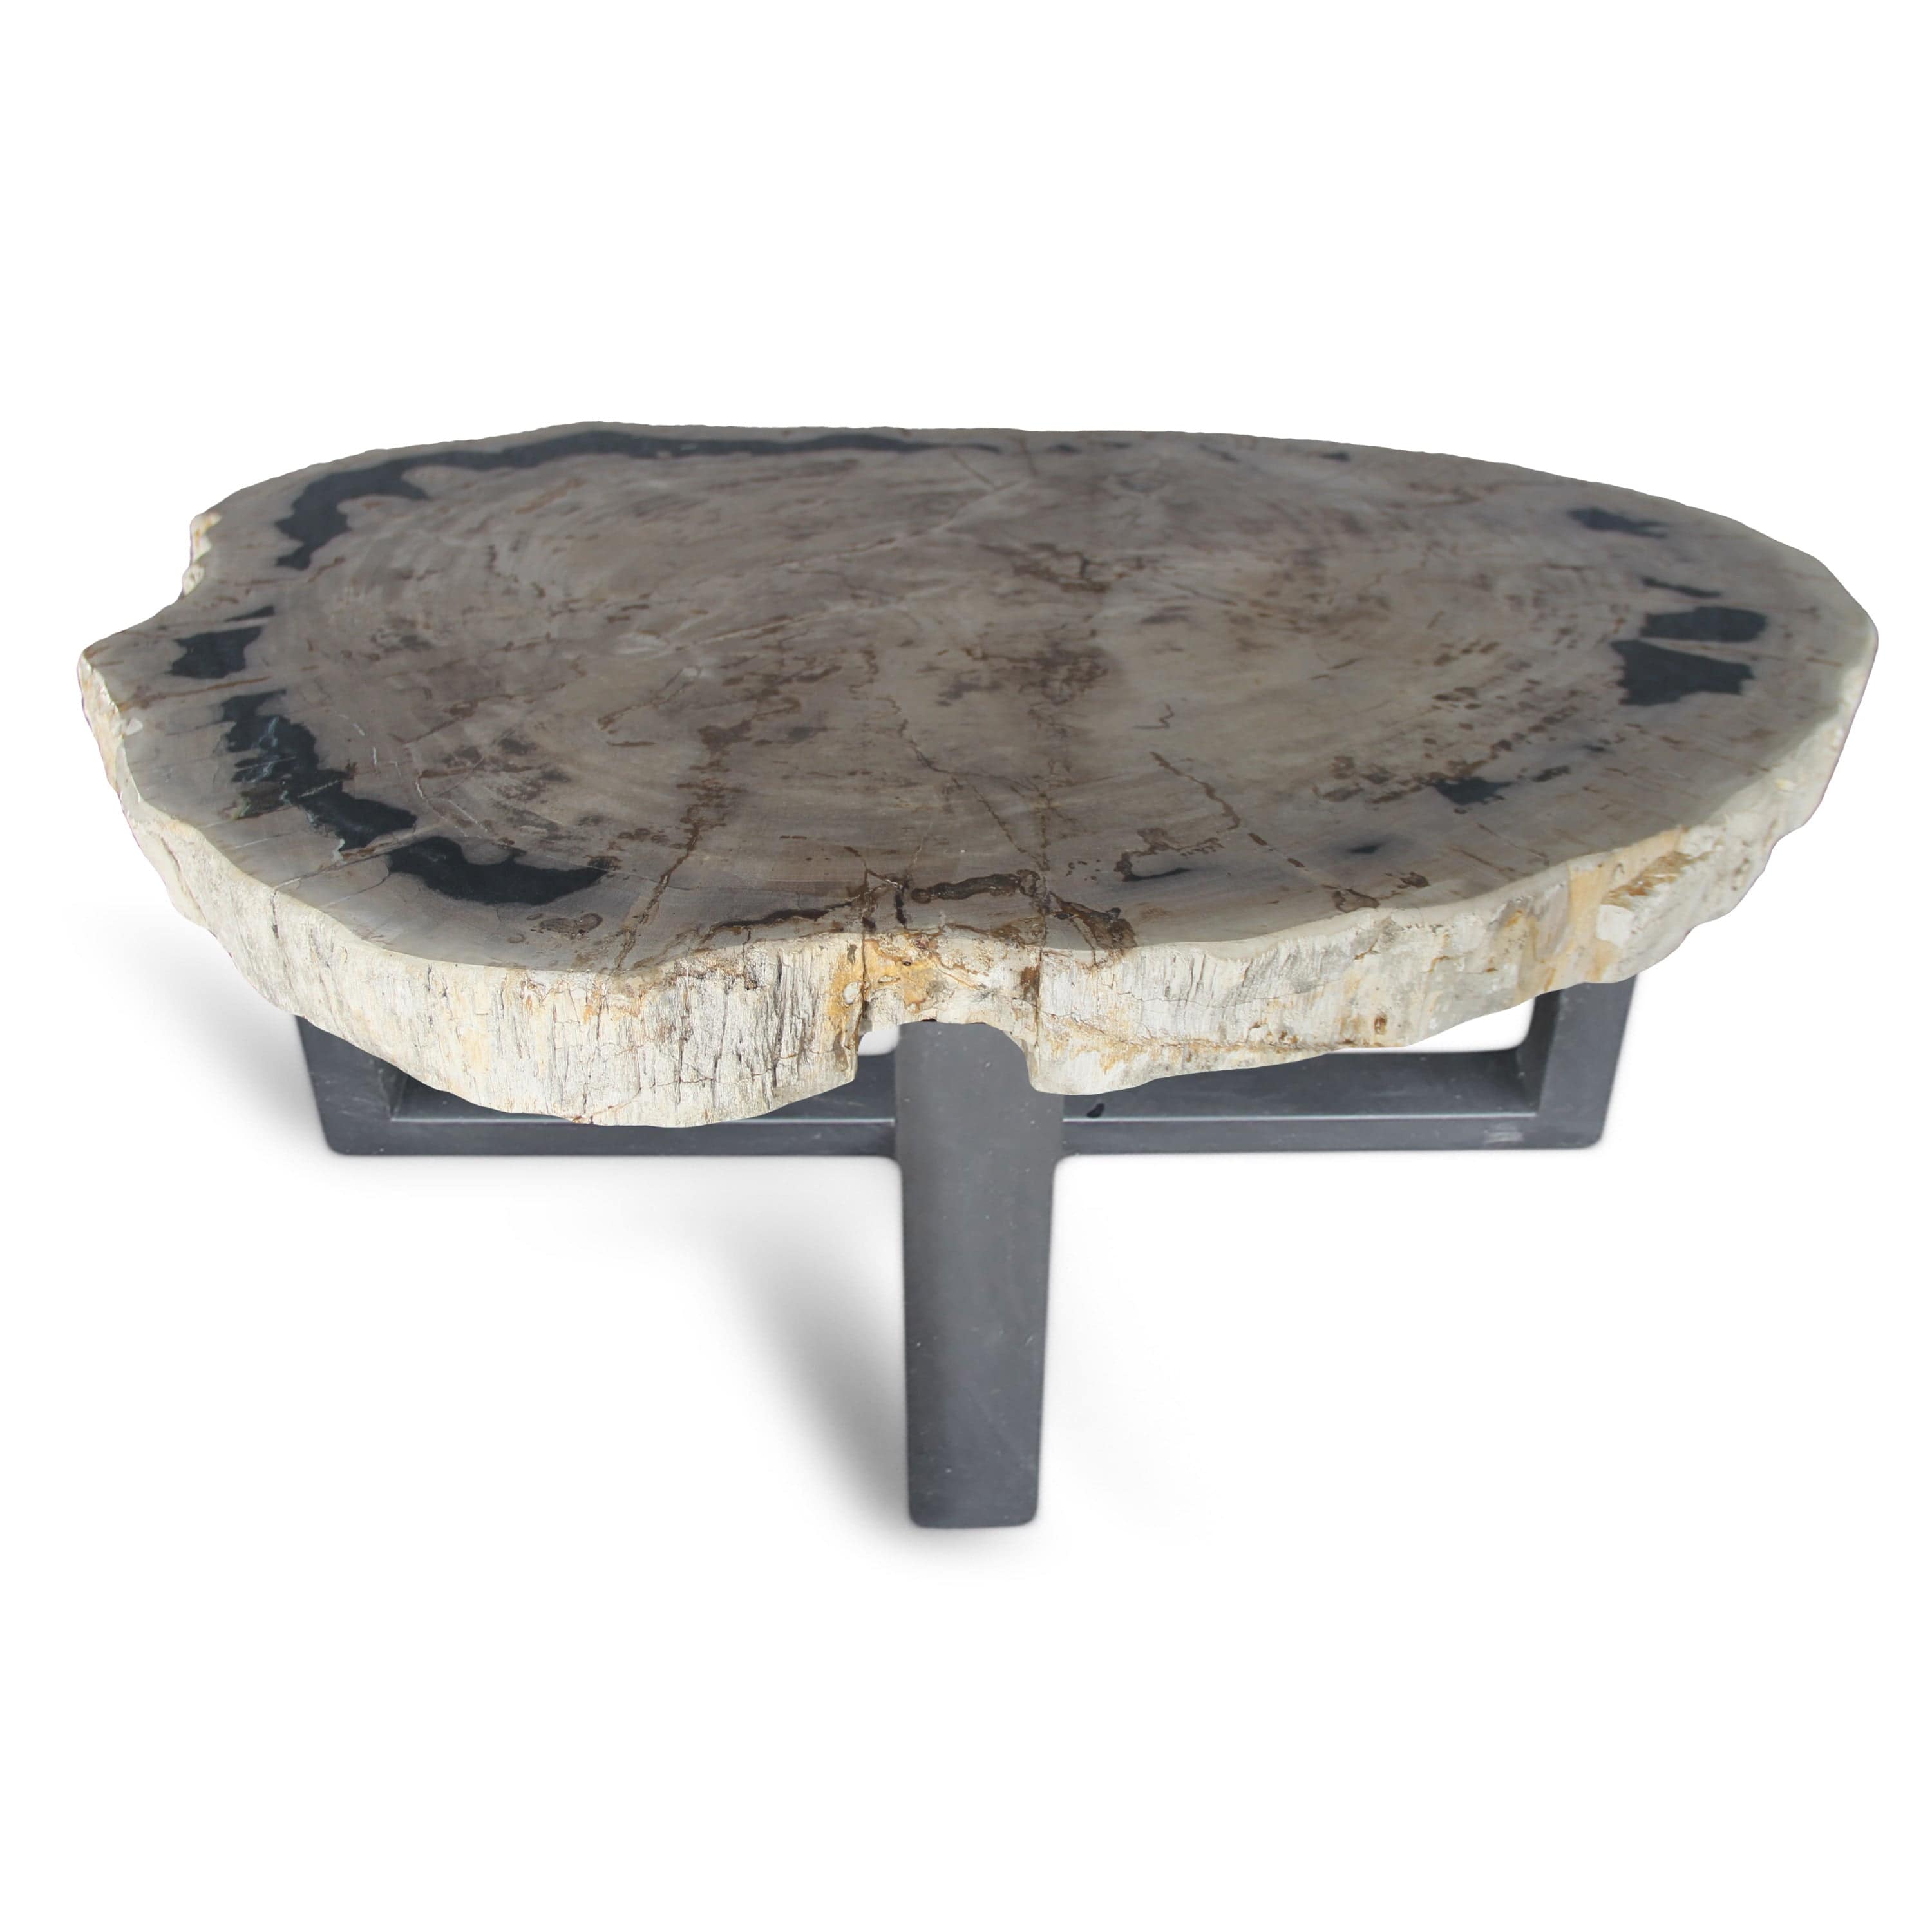 Kalifano Petrified Wood Petrified Wood Round Slab Coffee Table from Indonesia - 37" / 163 lbs PWT6000.002